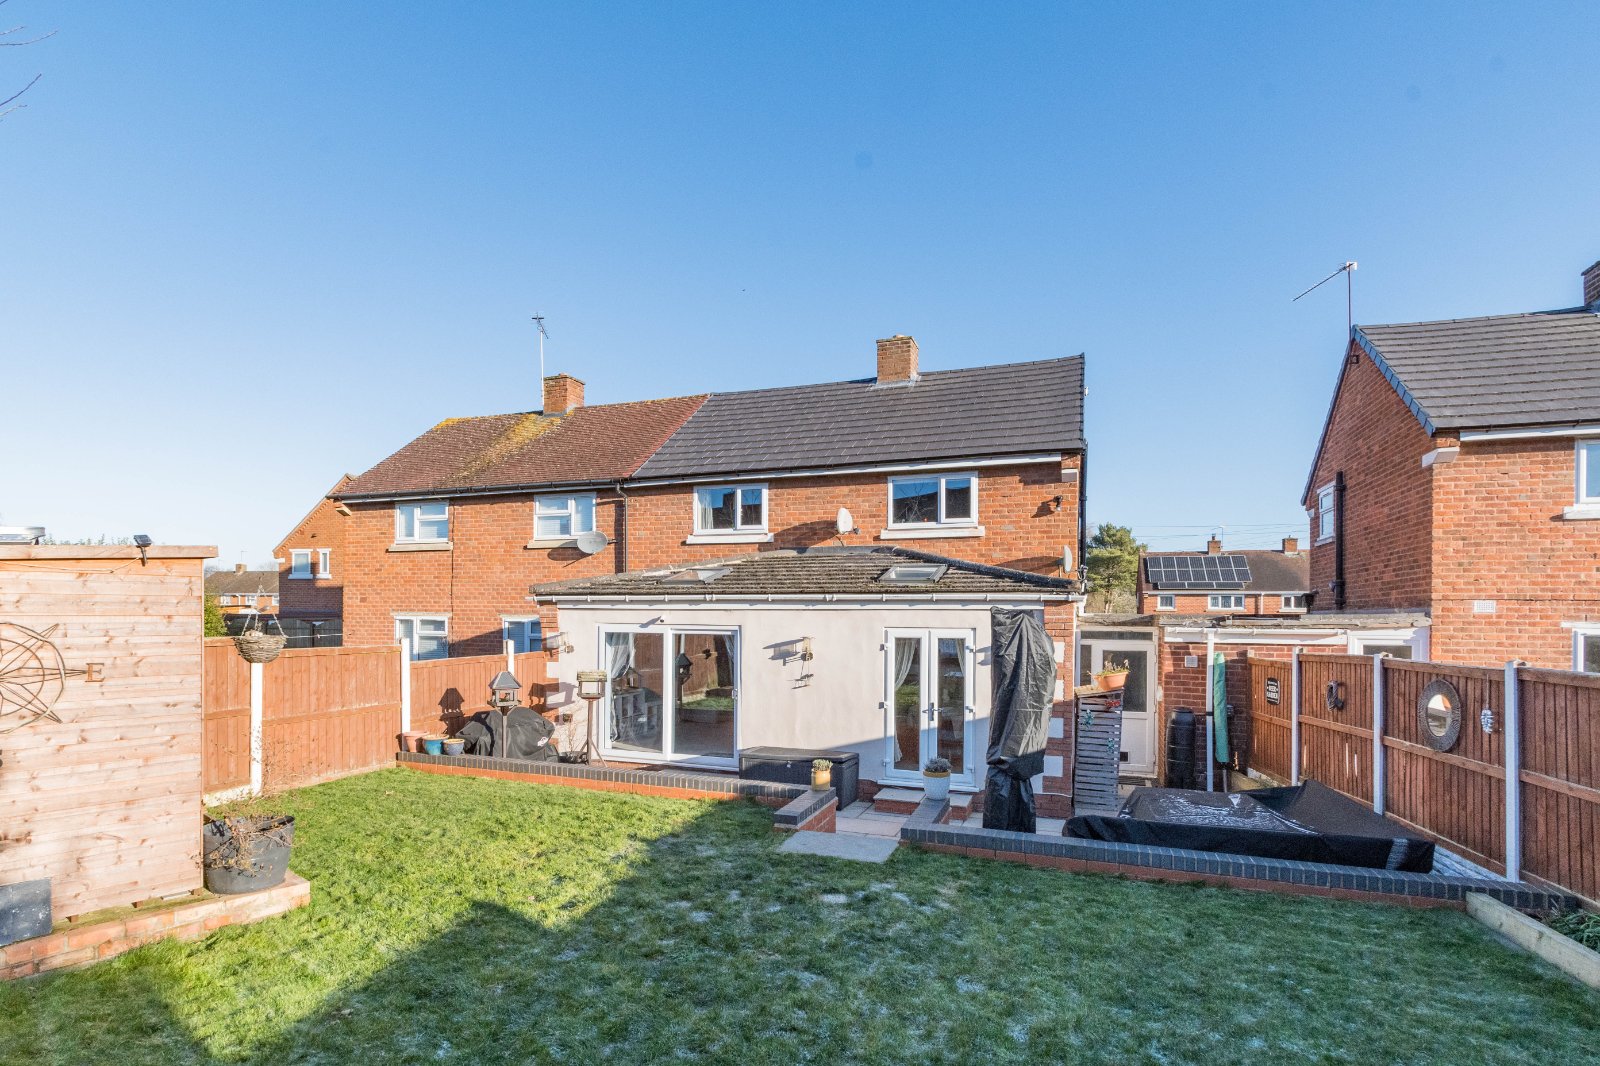 3 bed house for sale in Foxlydiate Crescent, Batchley - Property Image 1